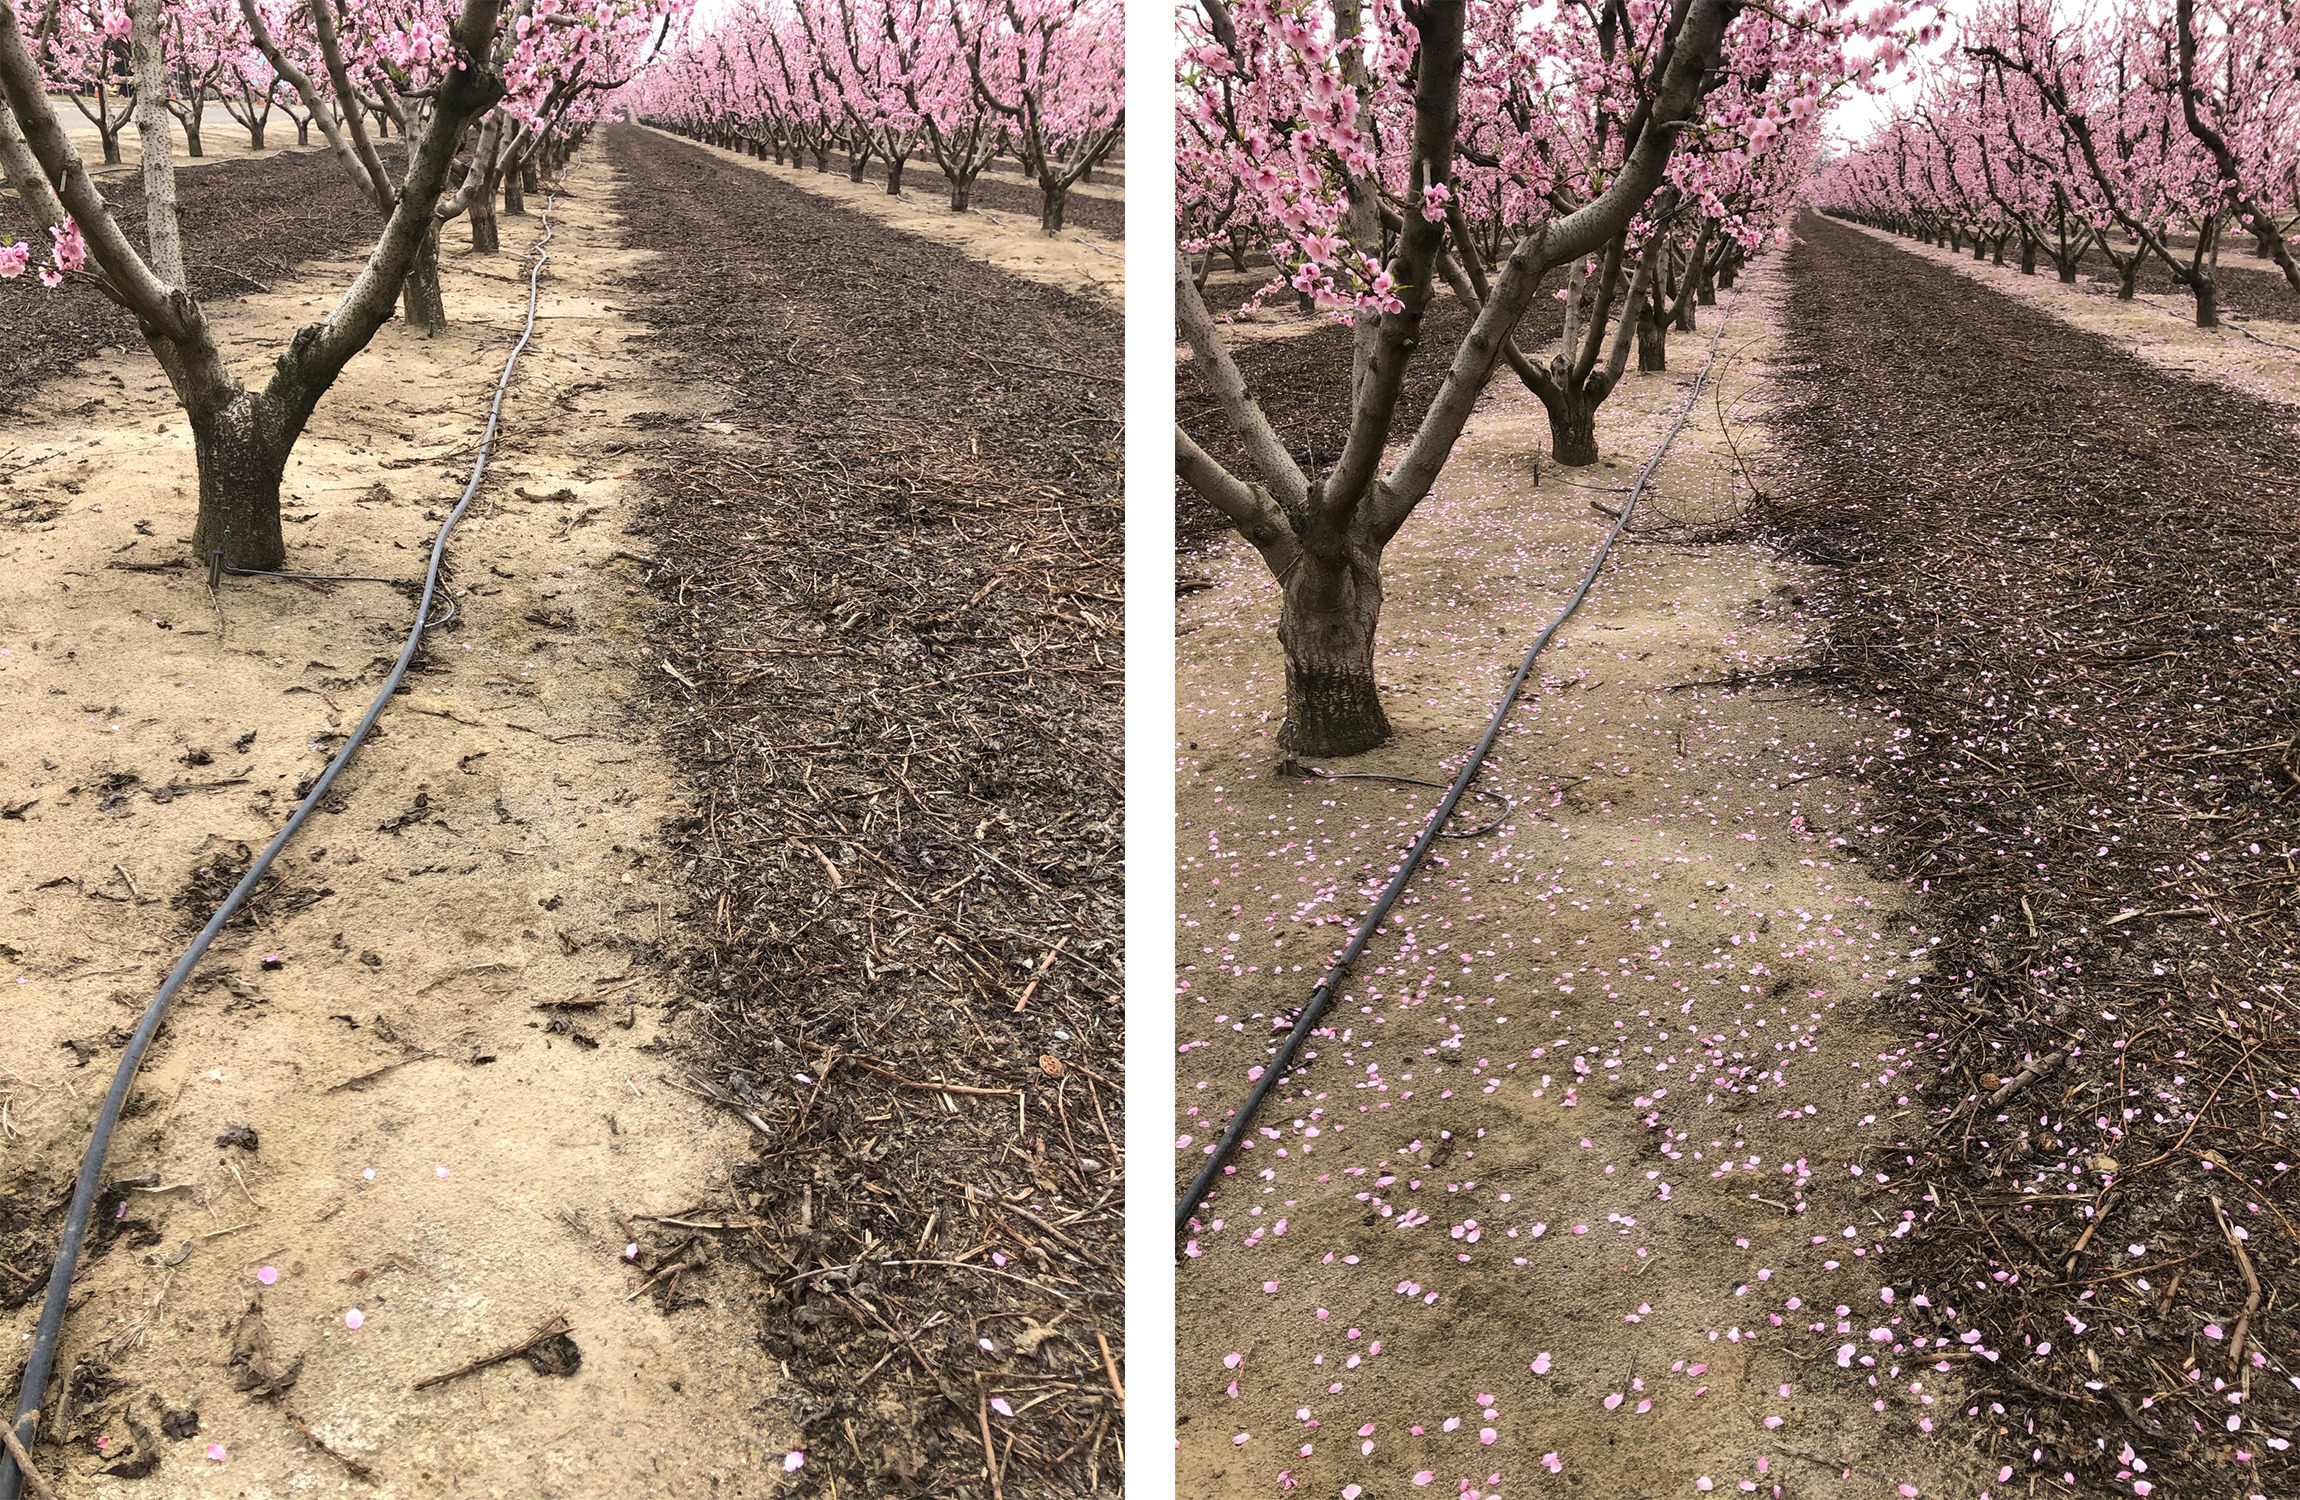 Peach trees showing how Accede accelerates petal drop